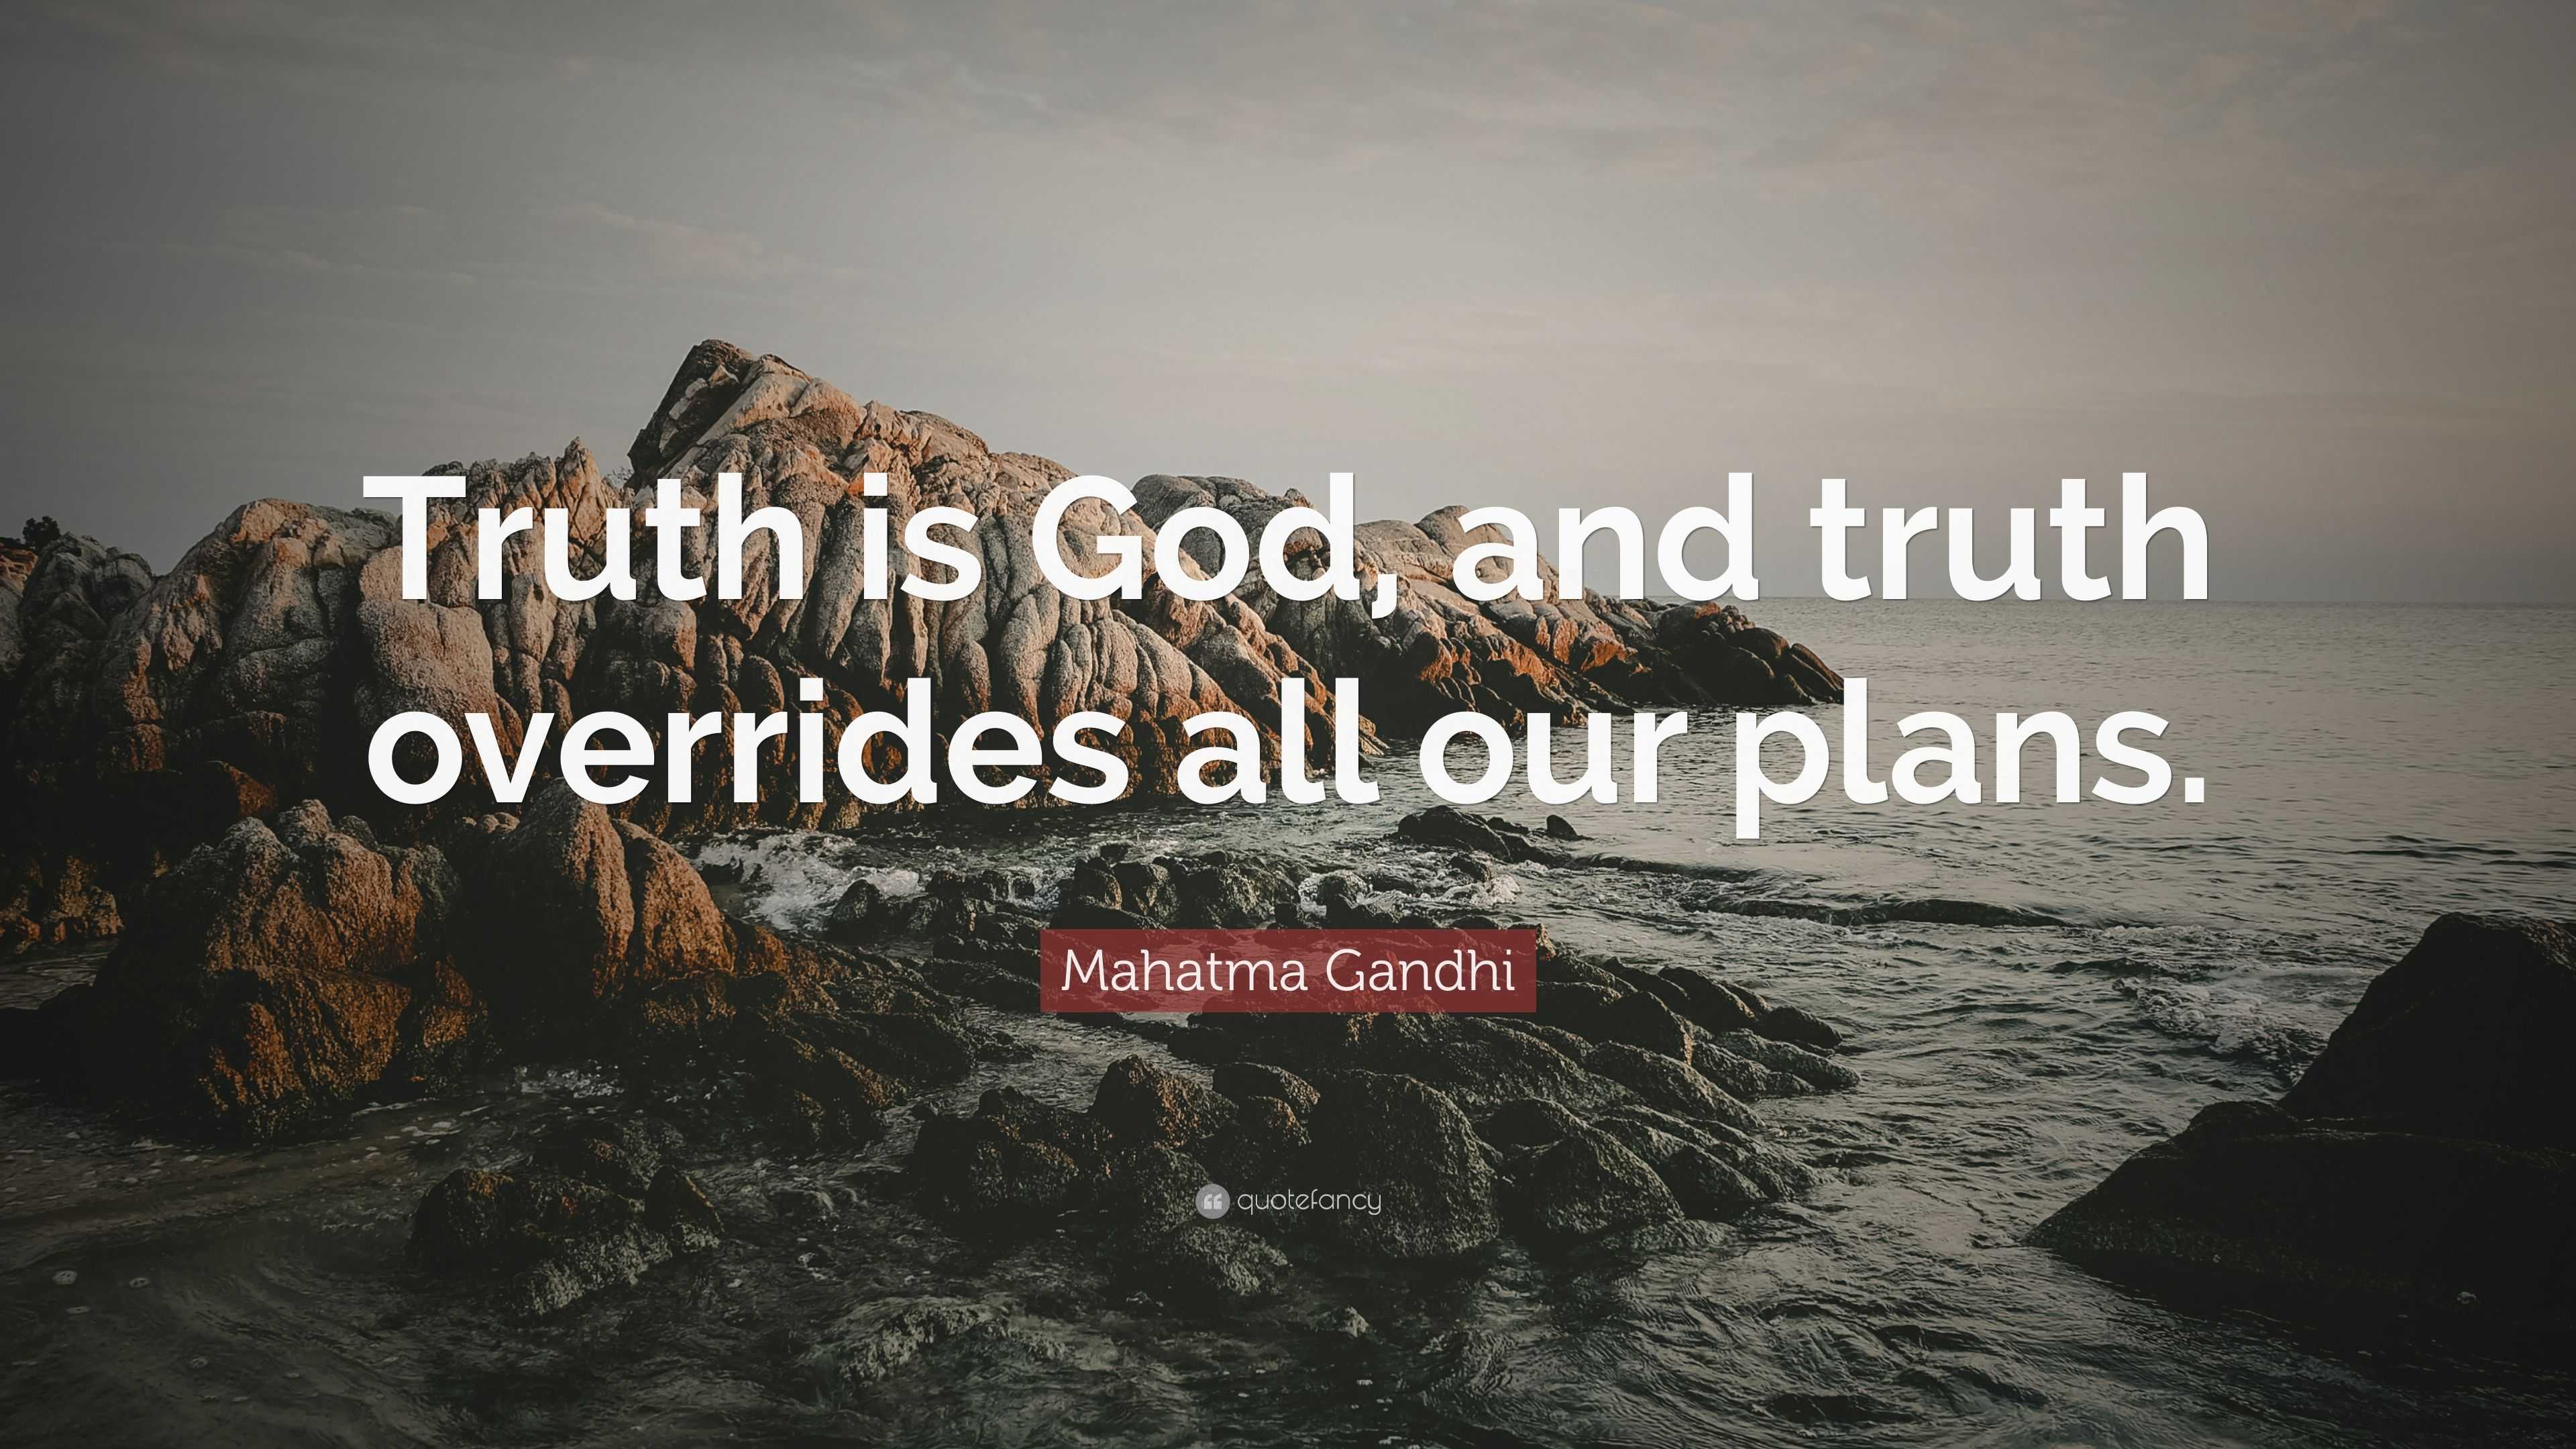 Mahatma Gandhi Quote: “Truth is God, and truth overrides all our plans.”